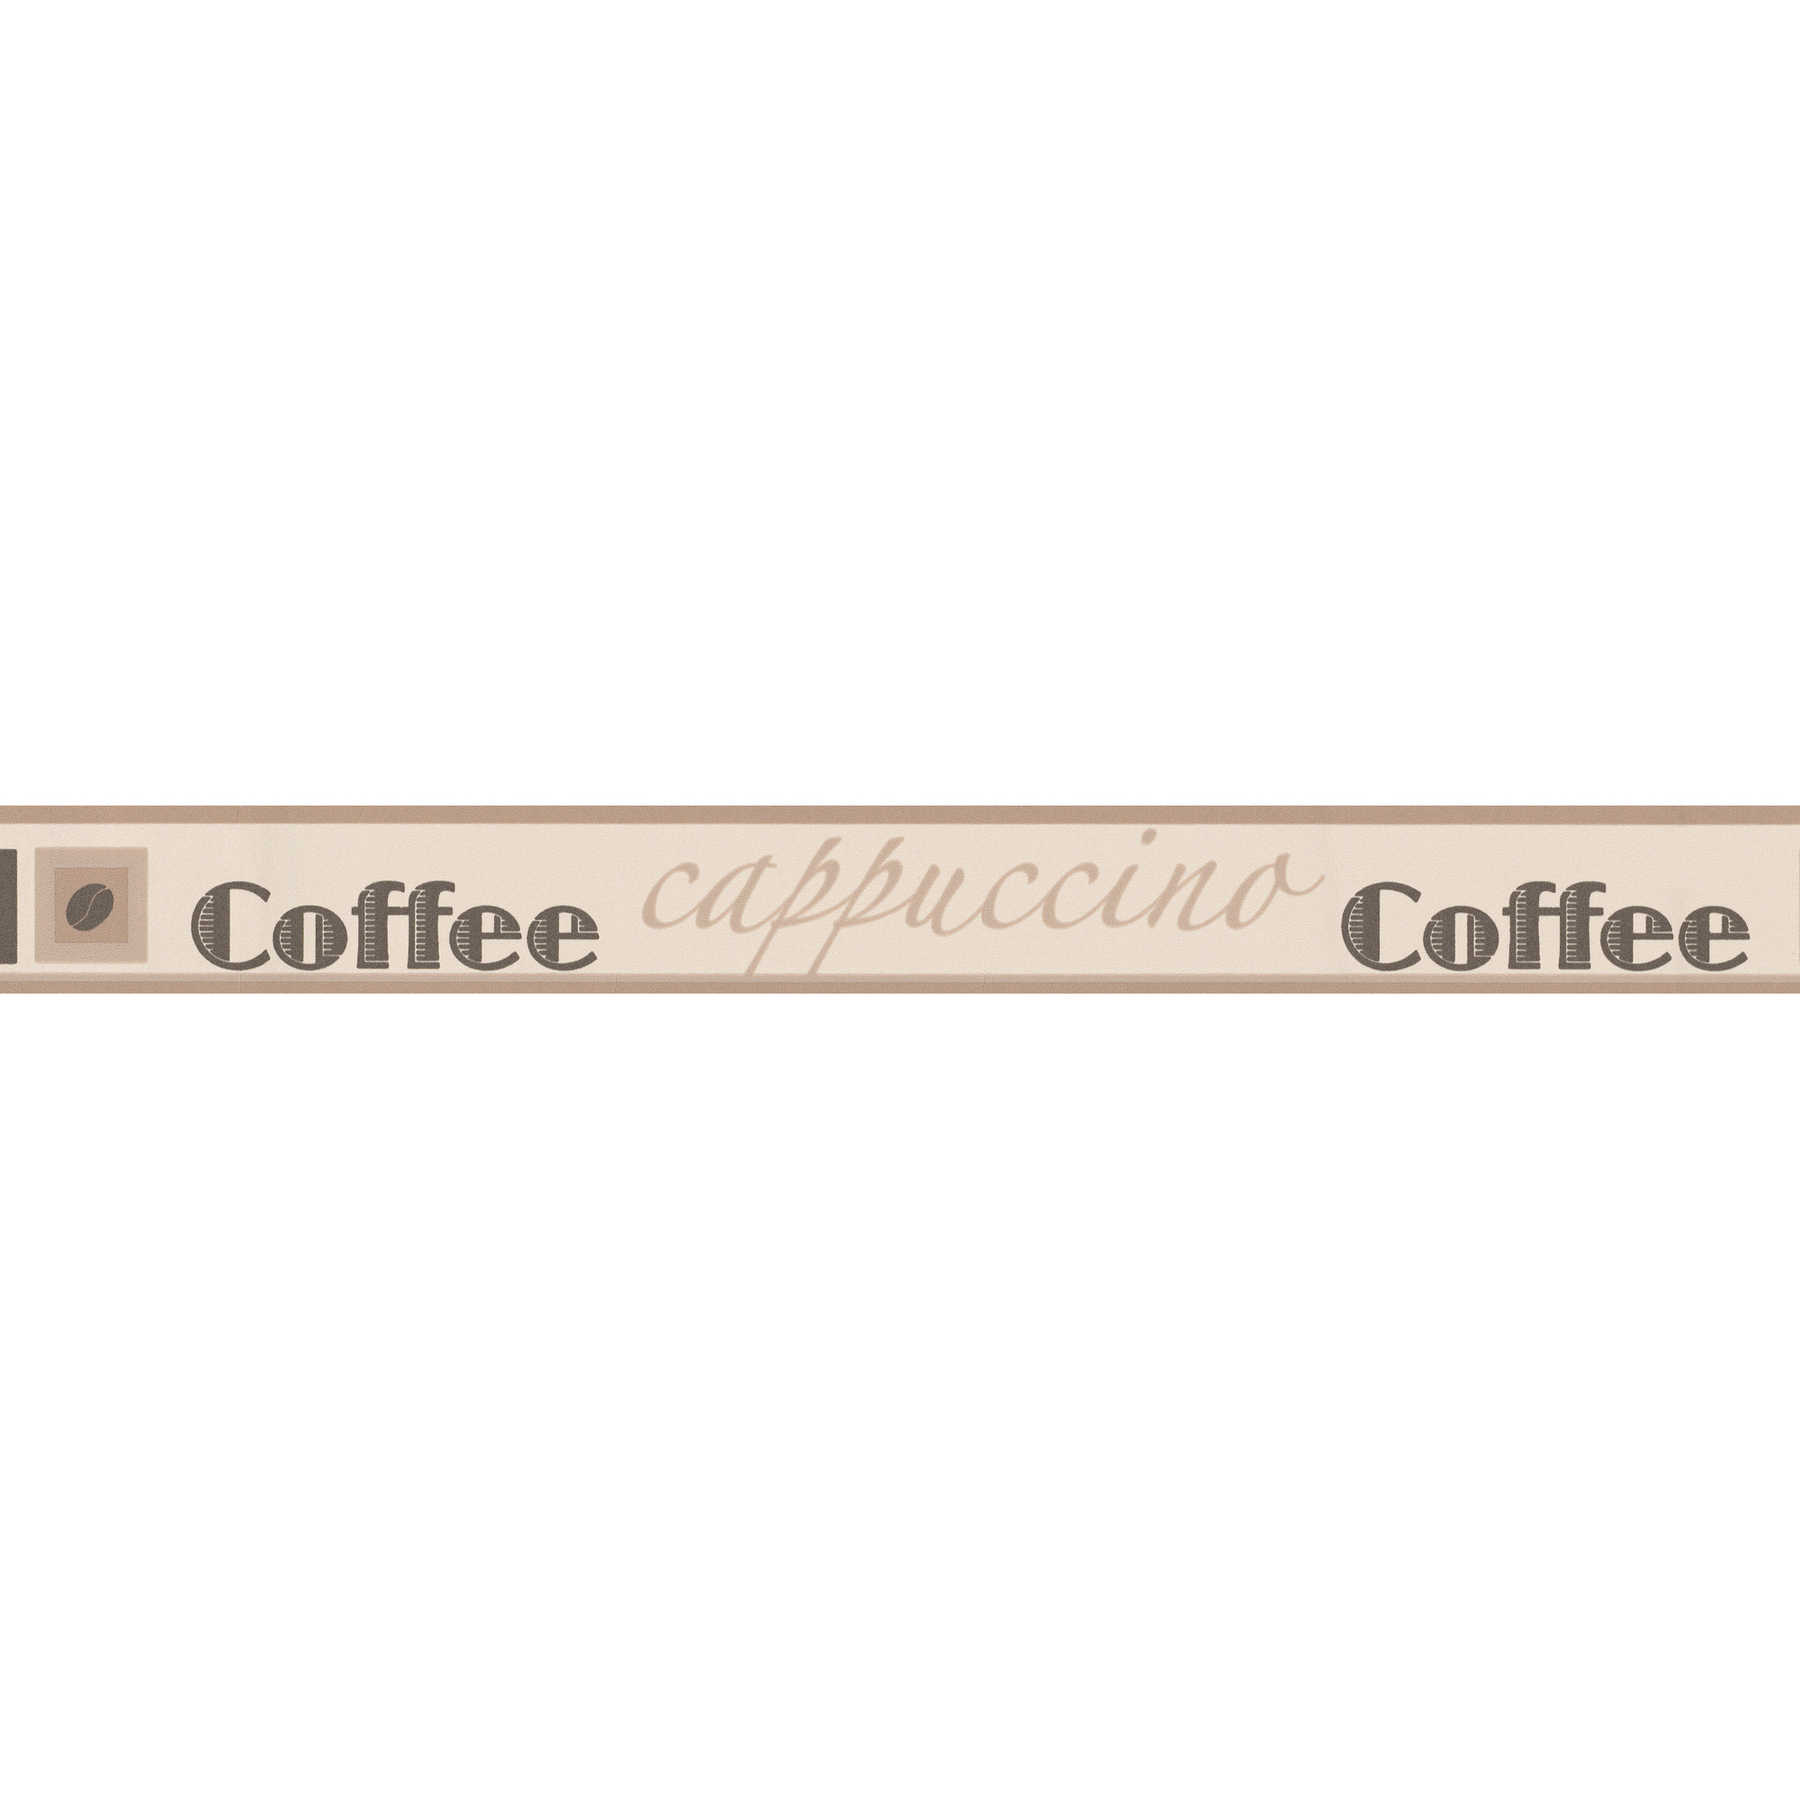         Border with coffee motif and typography - brown, beige, cream
    